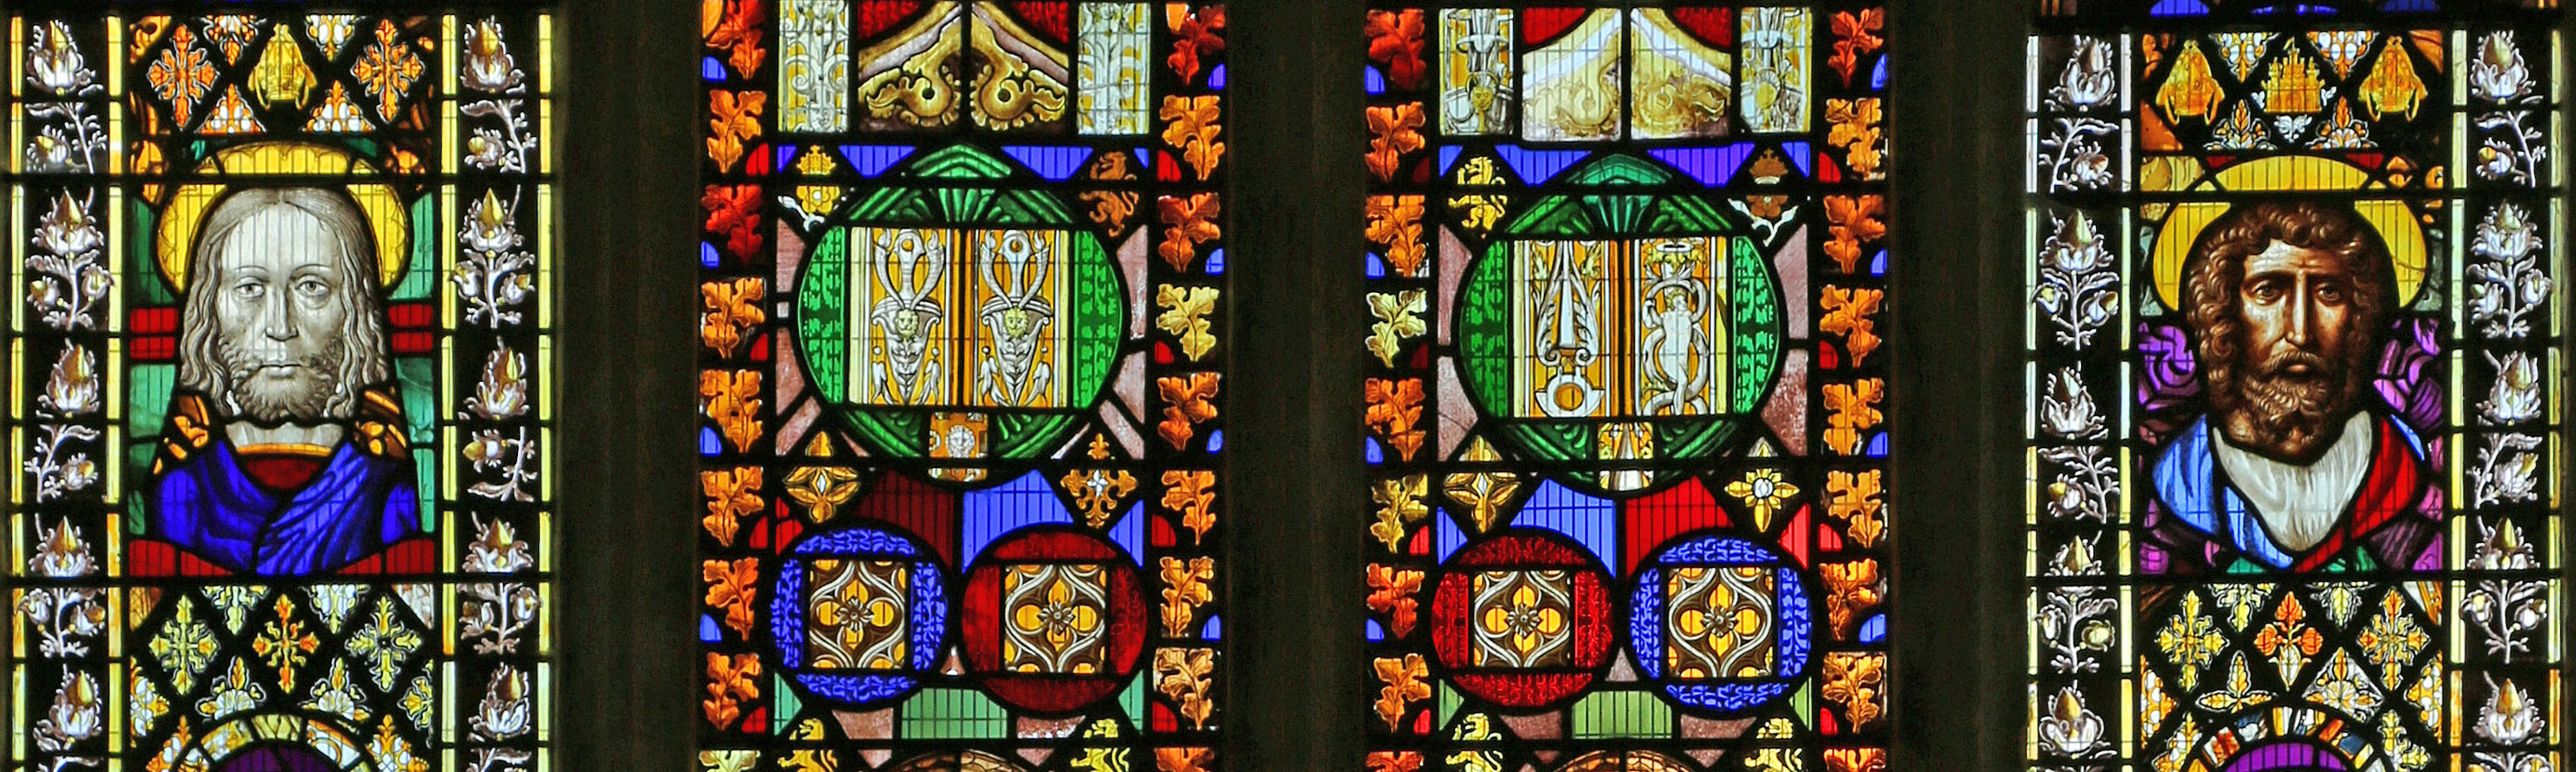 North Nave window containing fragments of 14th & 15th century glass